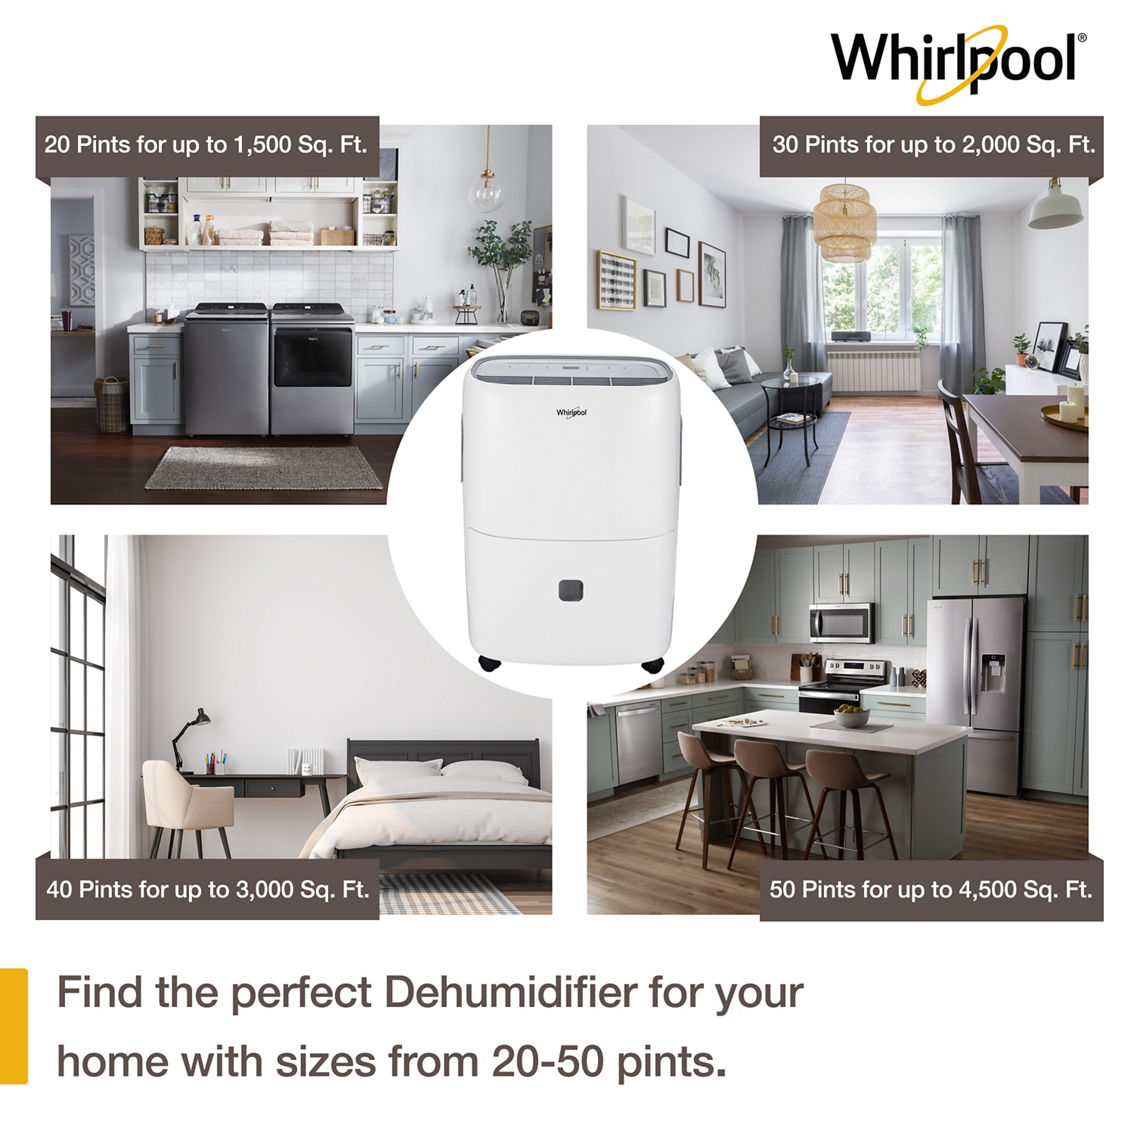 Whirlpool 50 pt. Dehumidifier with Pump - Image 5 of 6